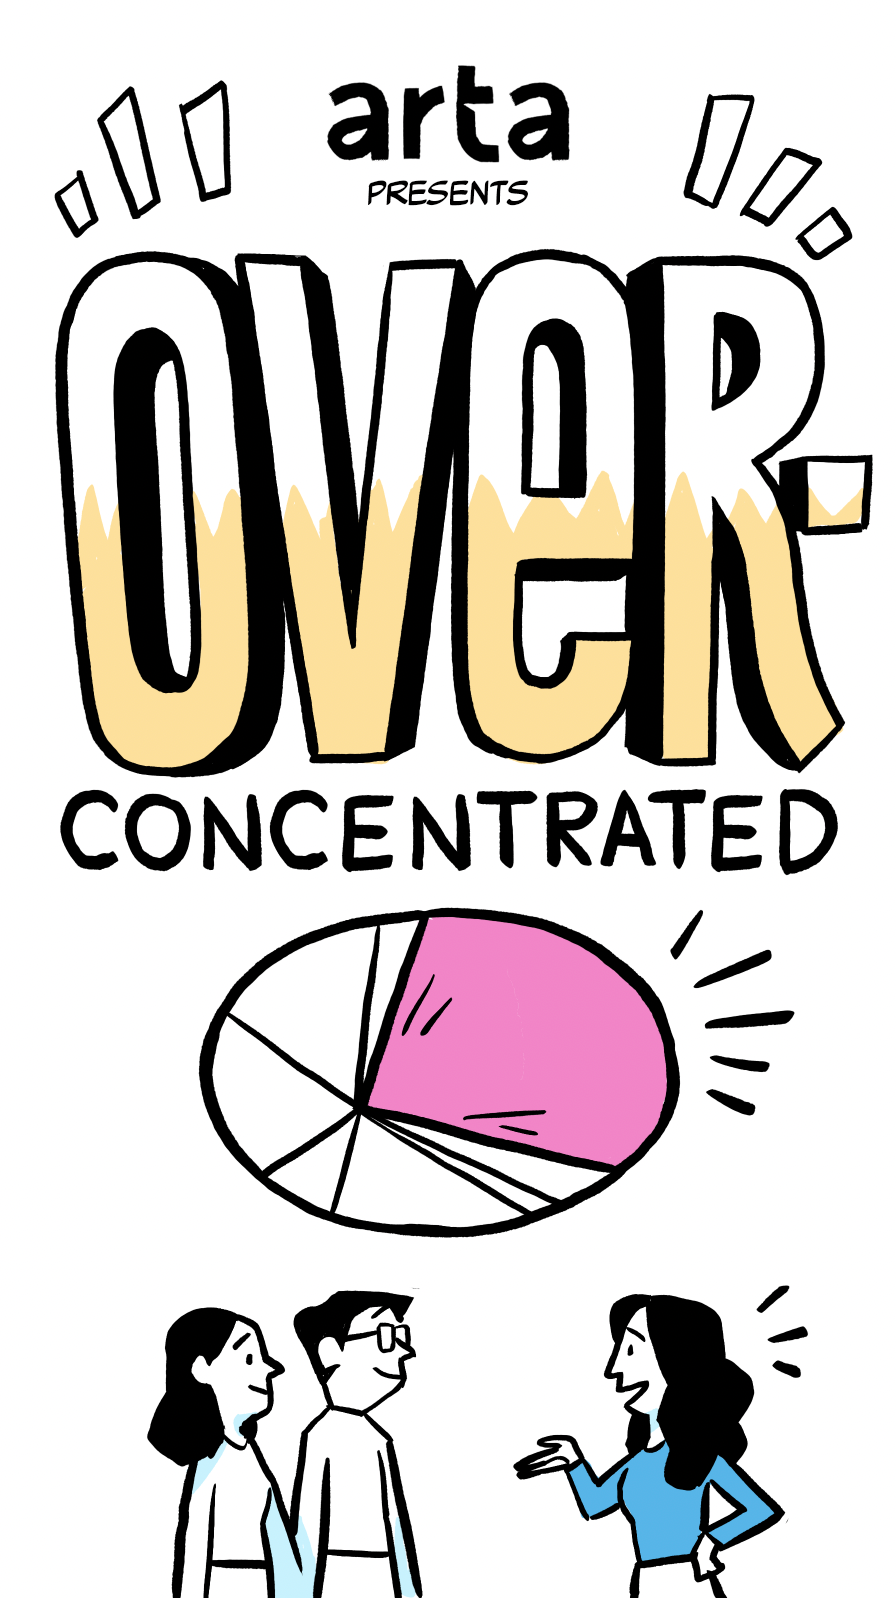 Arta Presents: Are you over-concentrated?